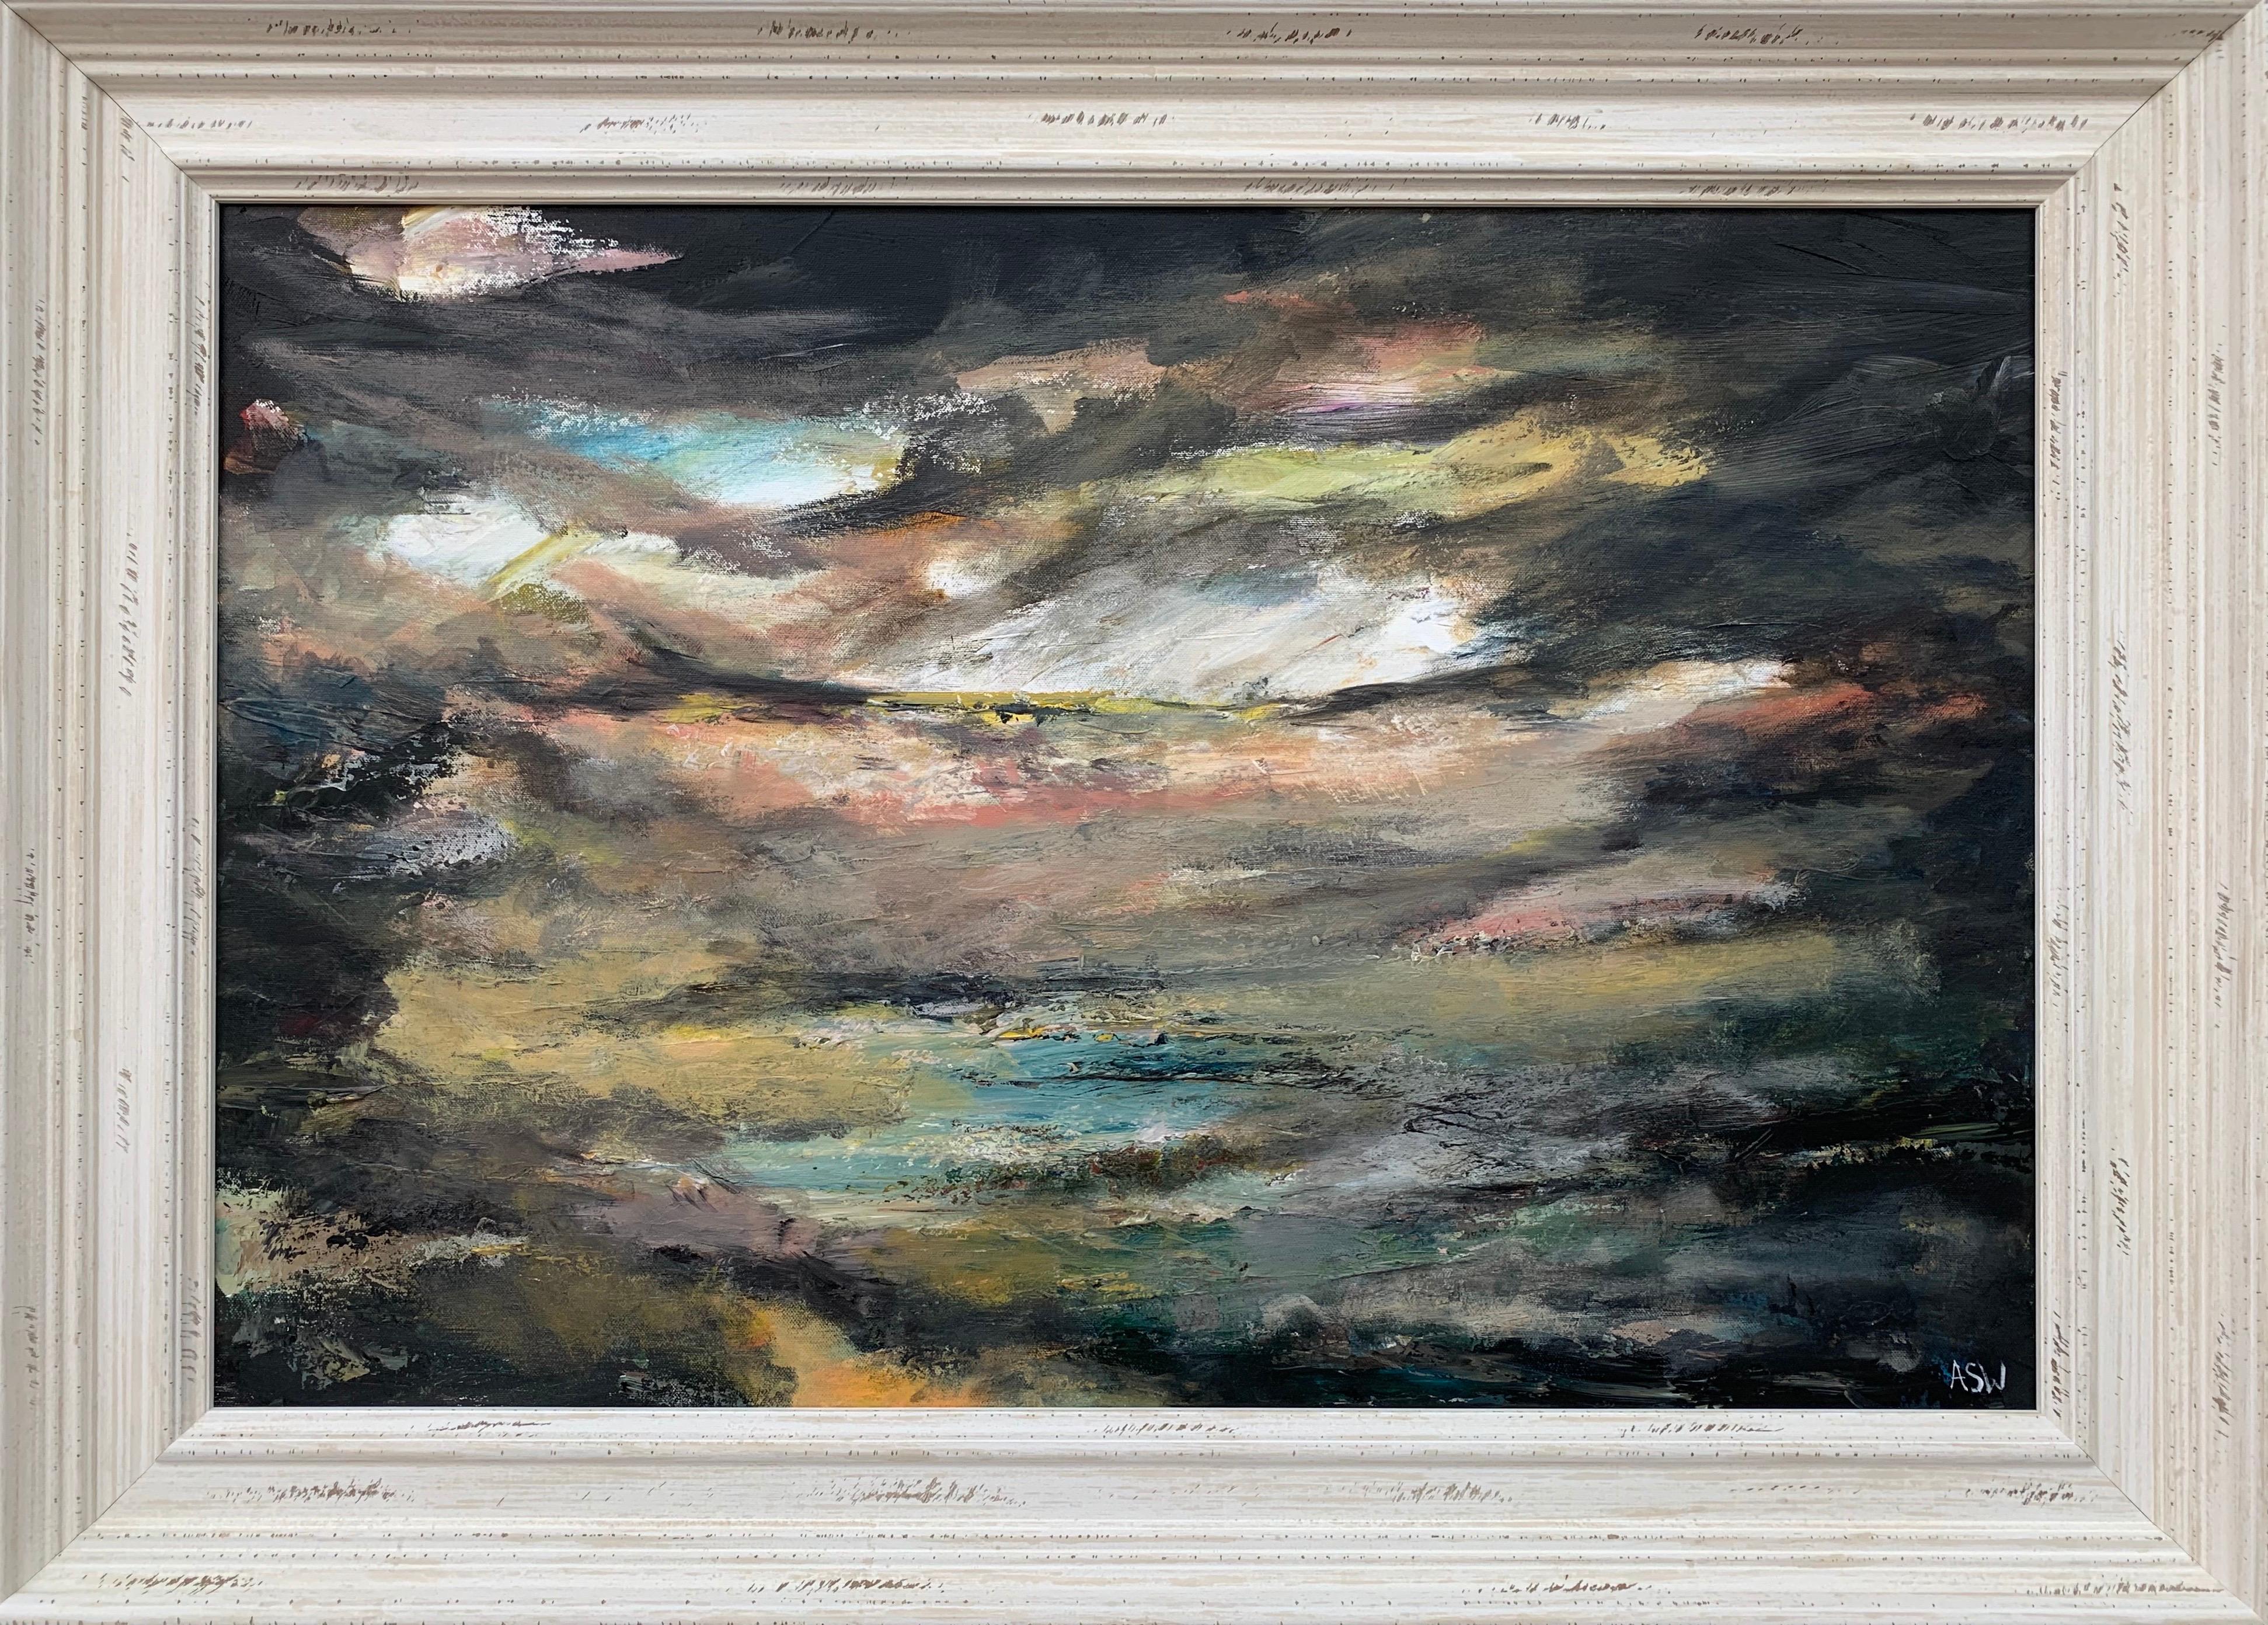 Dark Atmospheric Abstract Landscape Painting by Contemporary British Artist